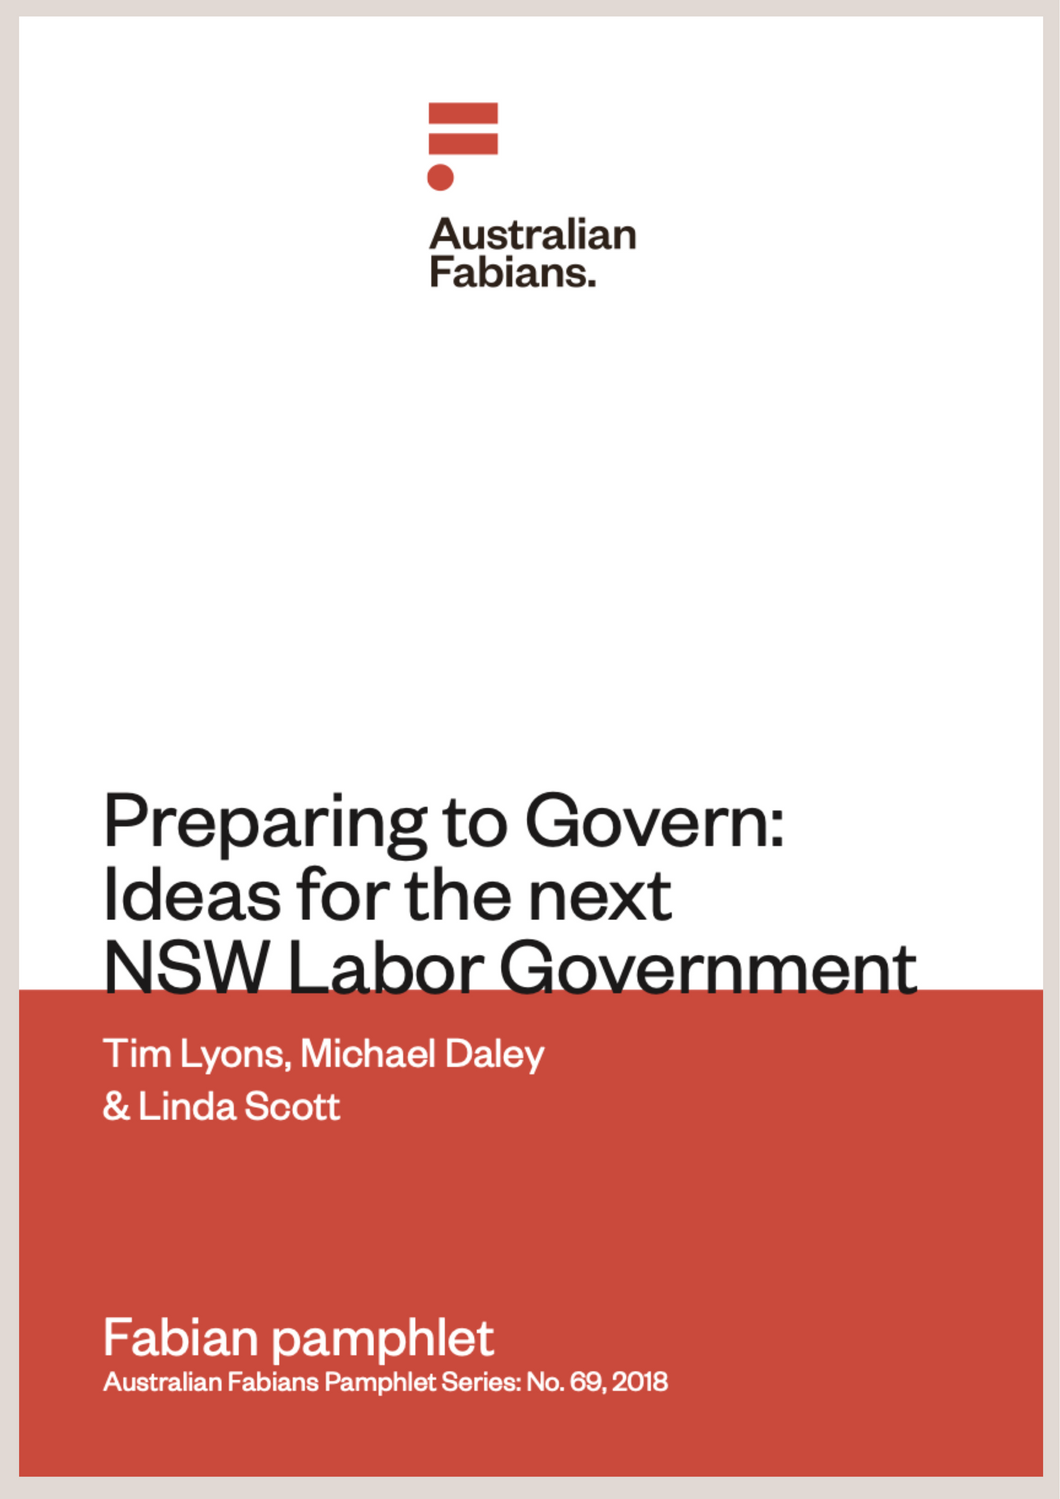 Fabian pamphlet 69: Preparing to Govern: Ideas for the next NSW Labor Government